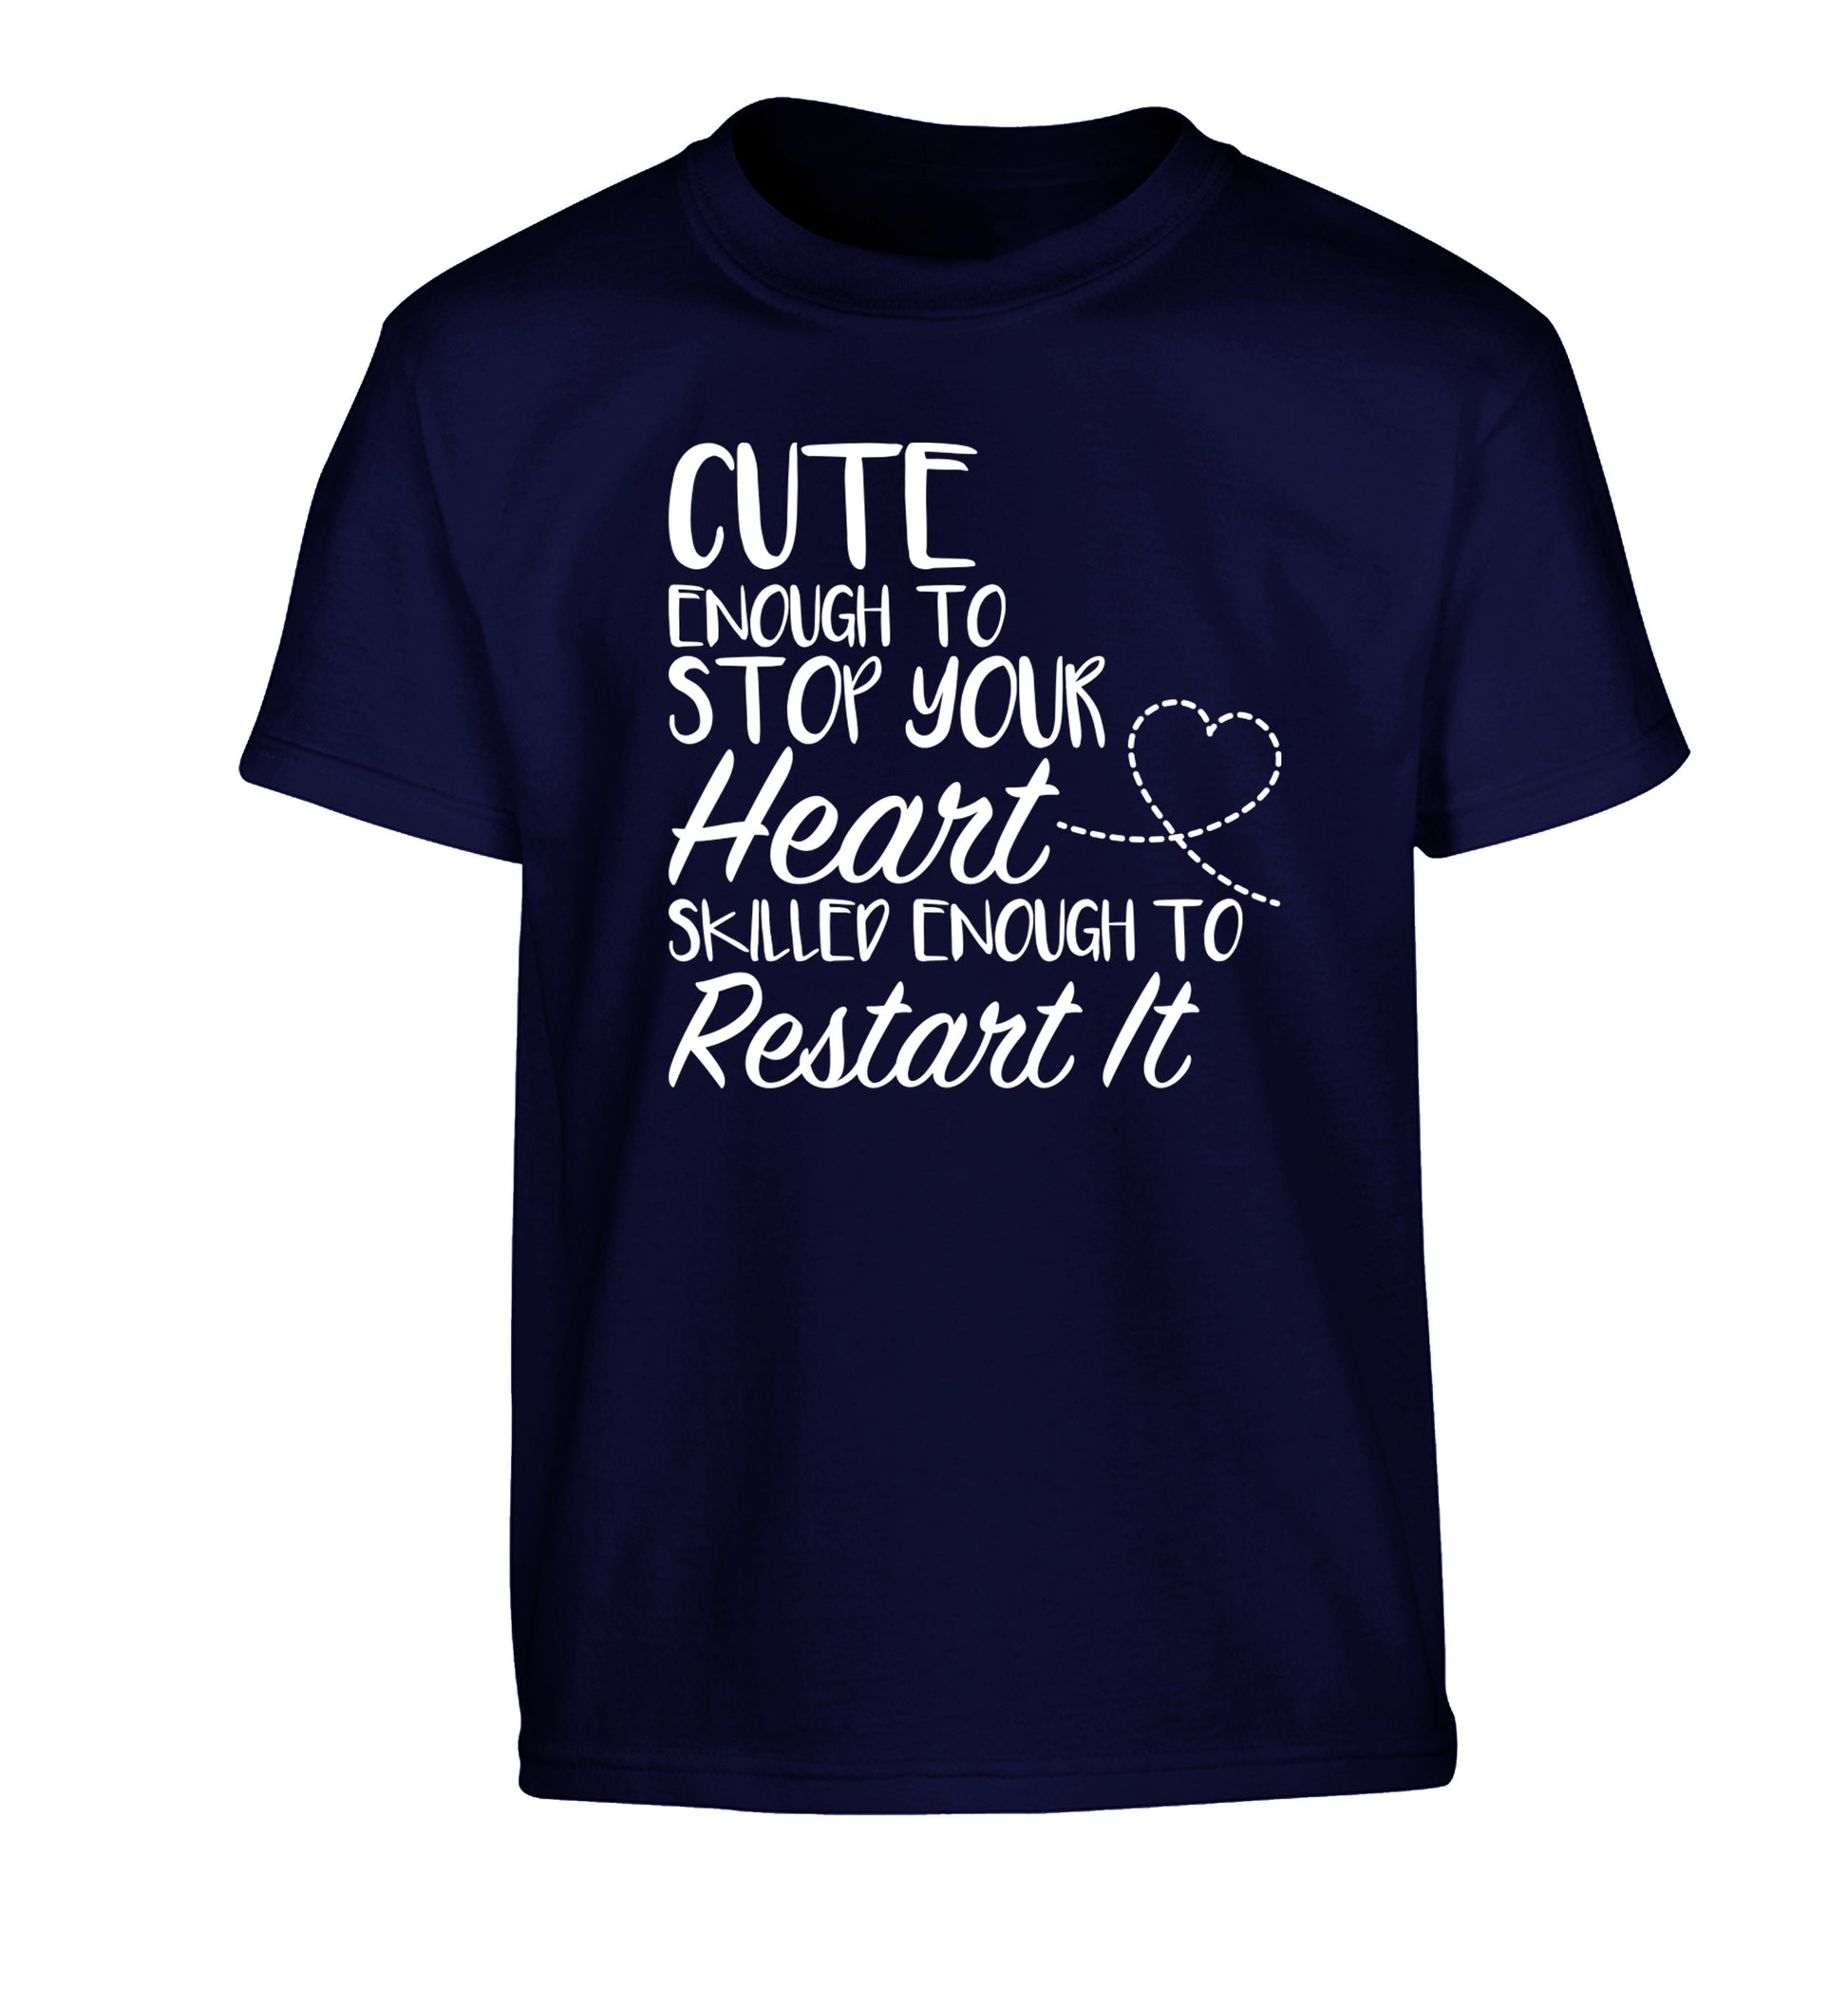 Cute enough to stop your heart skilled enough to restart it Children's navy Tshirt 12-13 Years